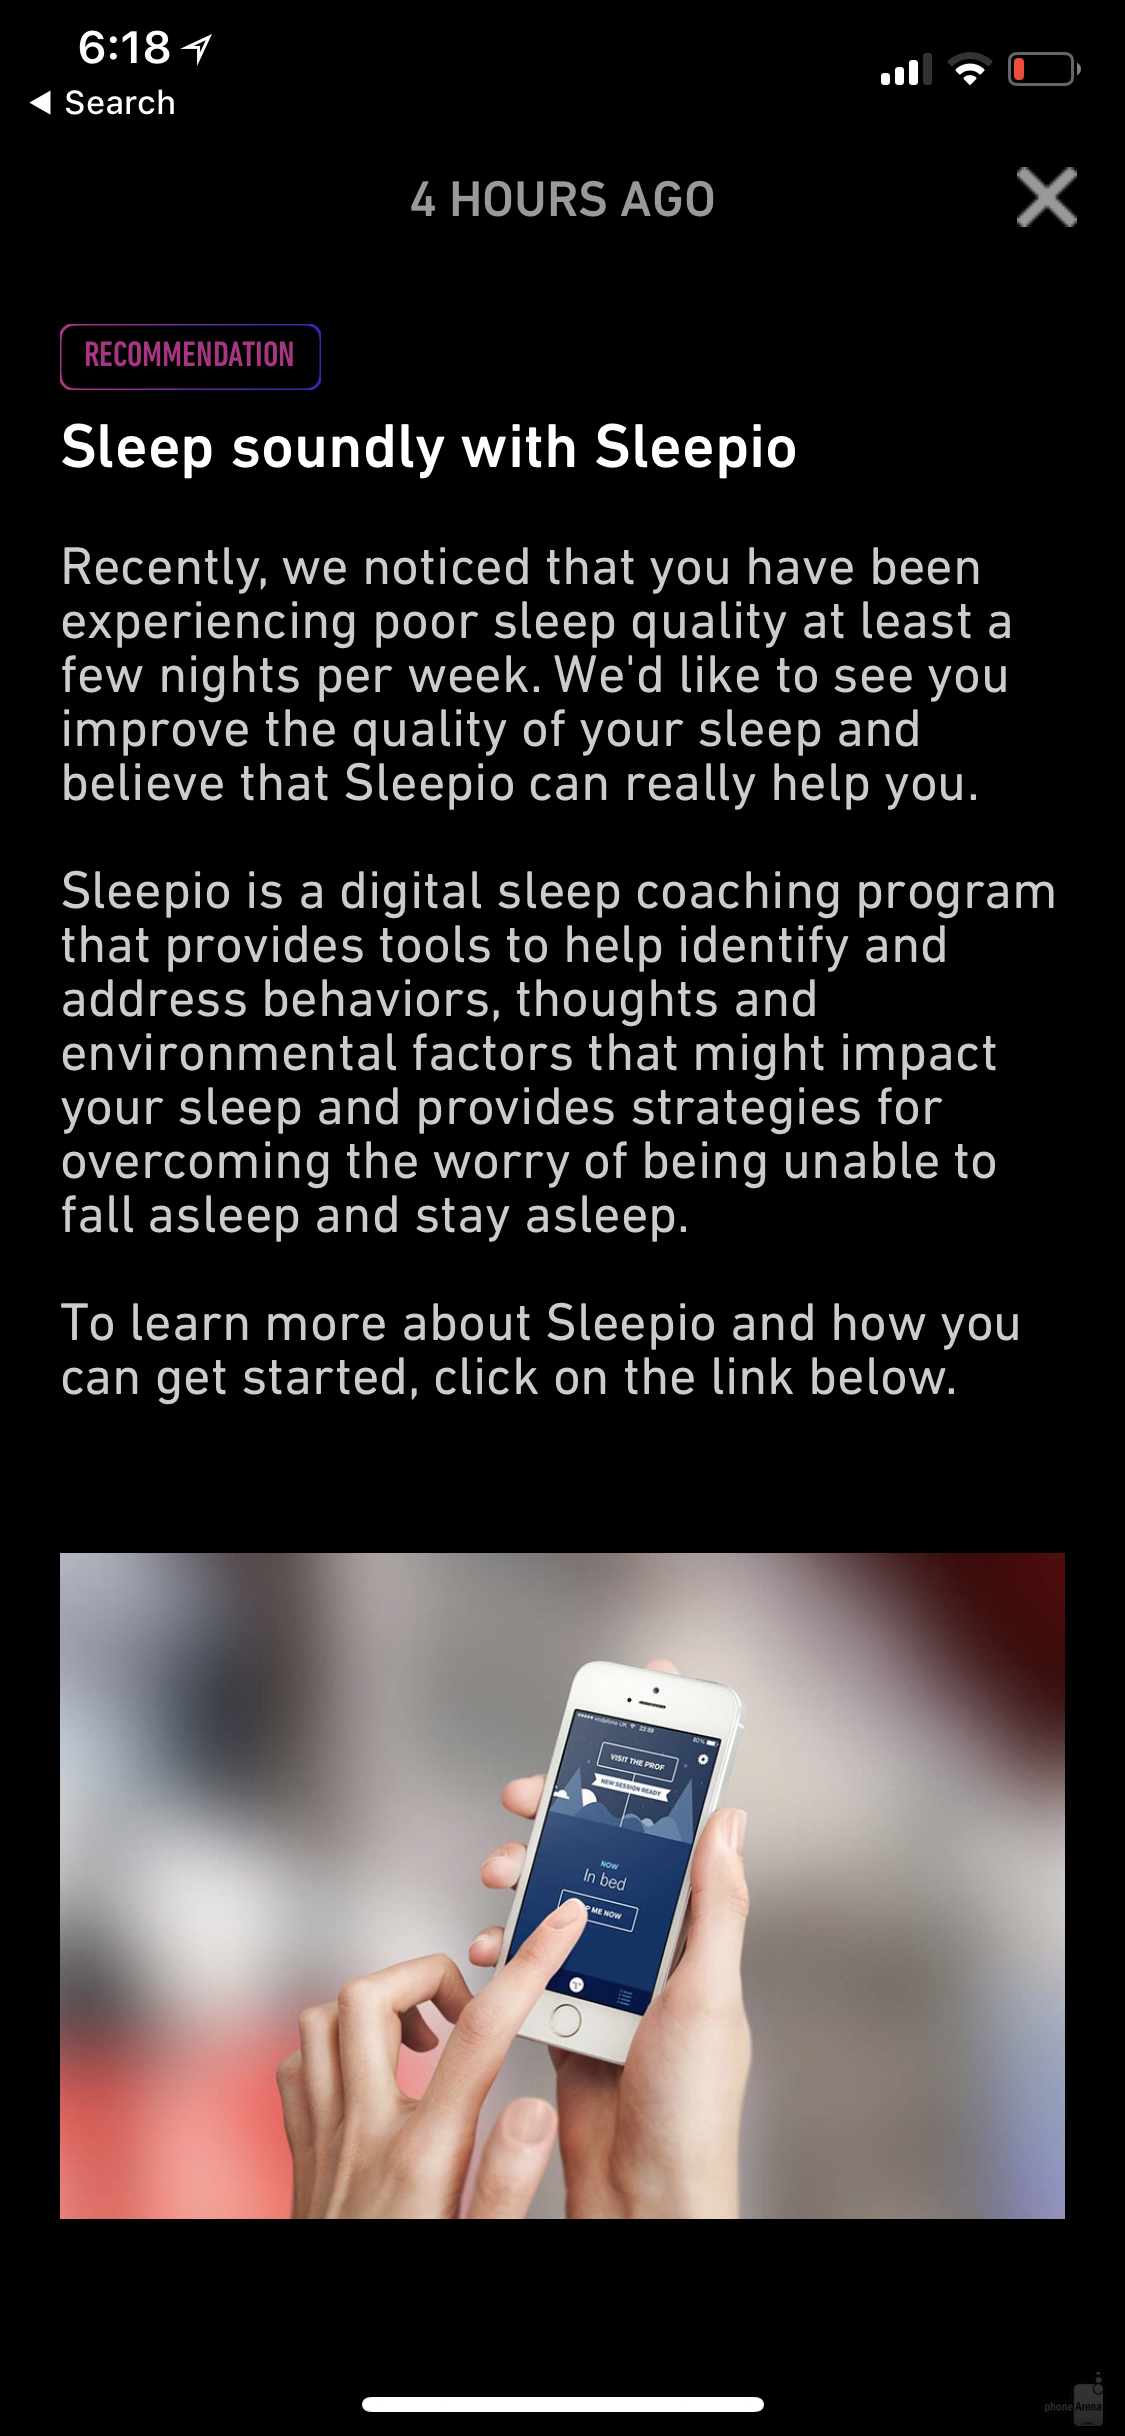 SleepScore Max hands-on: The best approach to sleep tracking?